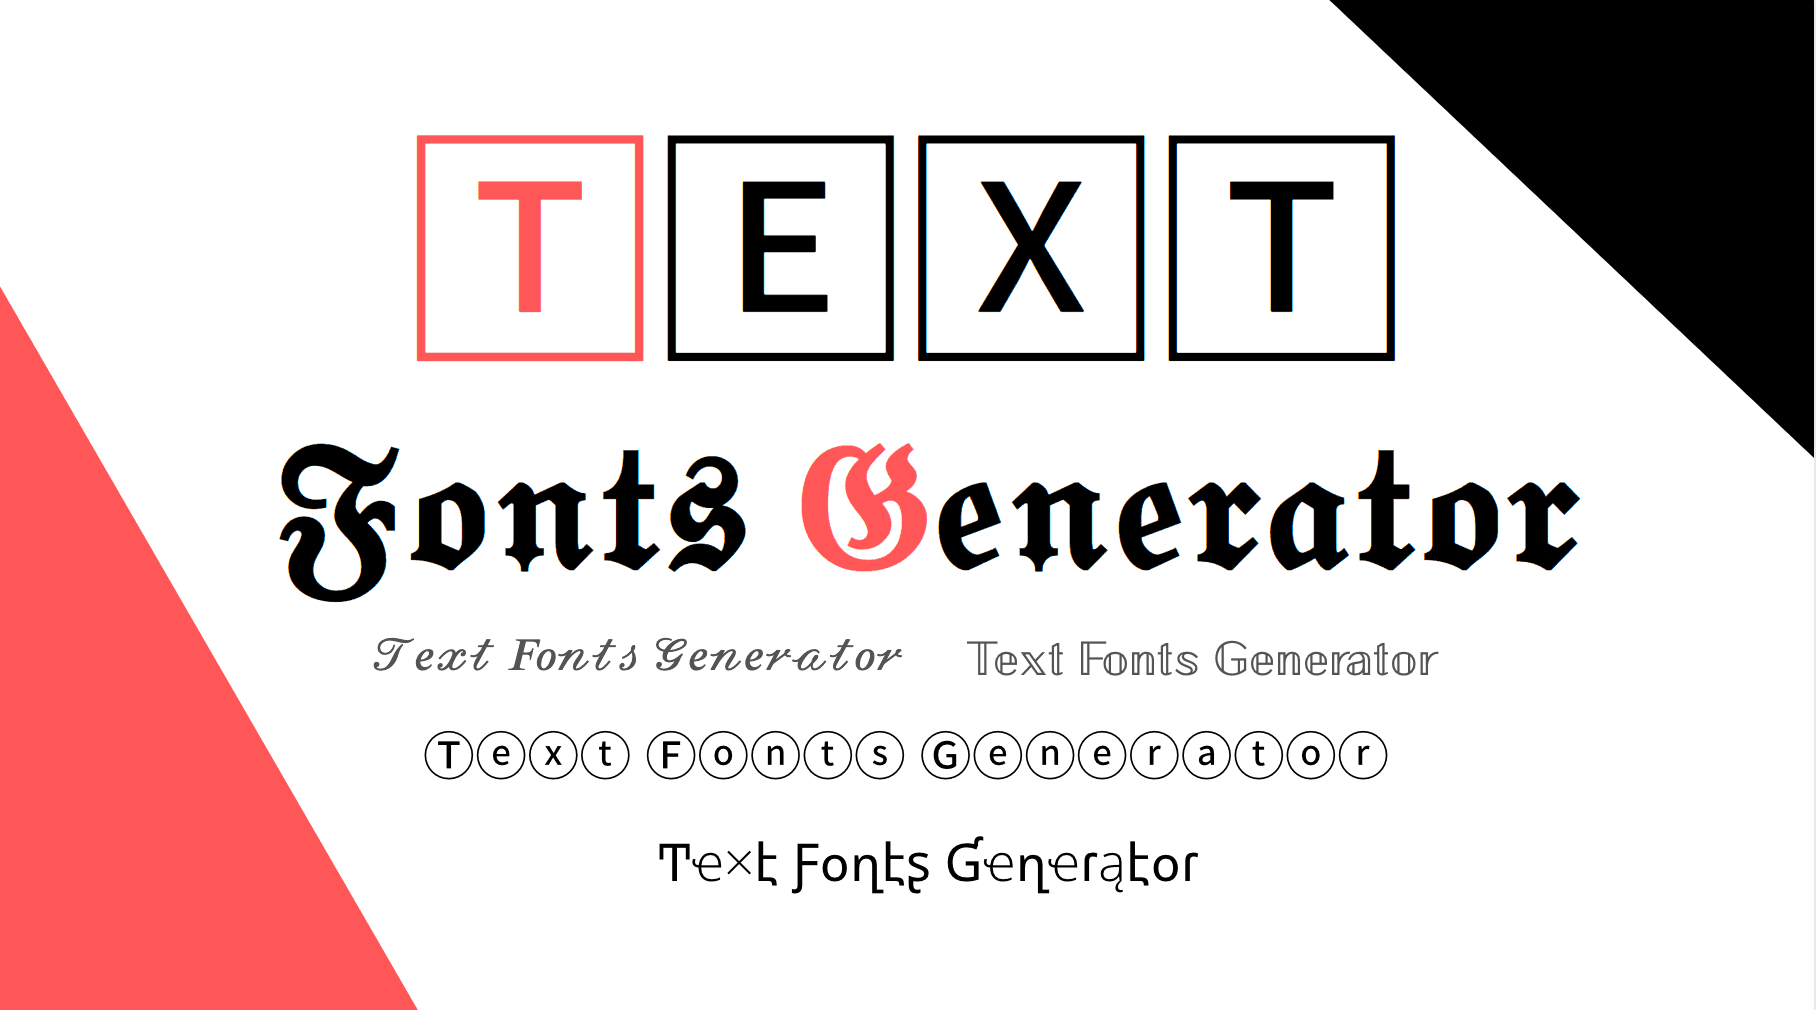 Font Copy and Paste #𝟙 ⚡(☉̃ₒ☉) ⭐ 𝐹𝒶𝓃𝒸𝓎 Text Fonts